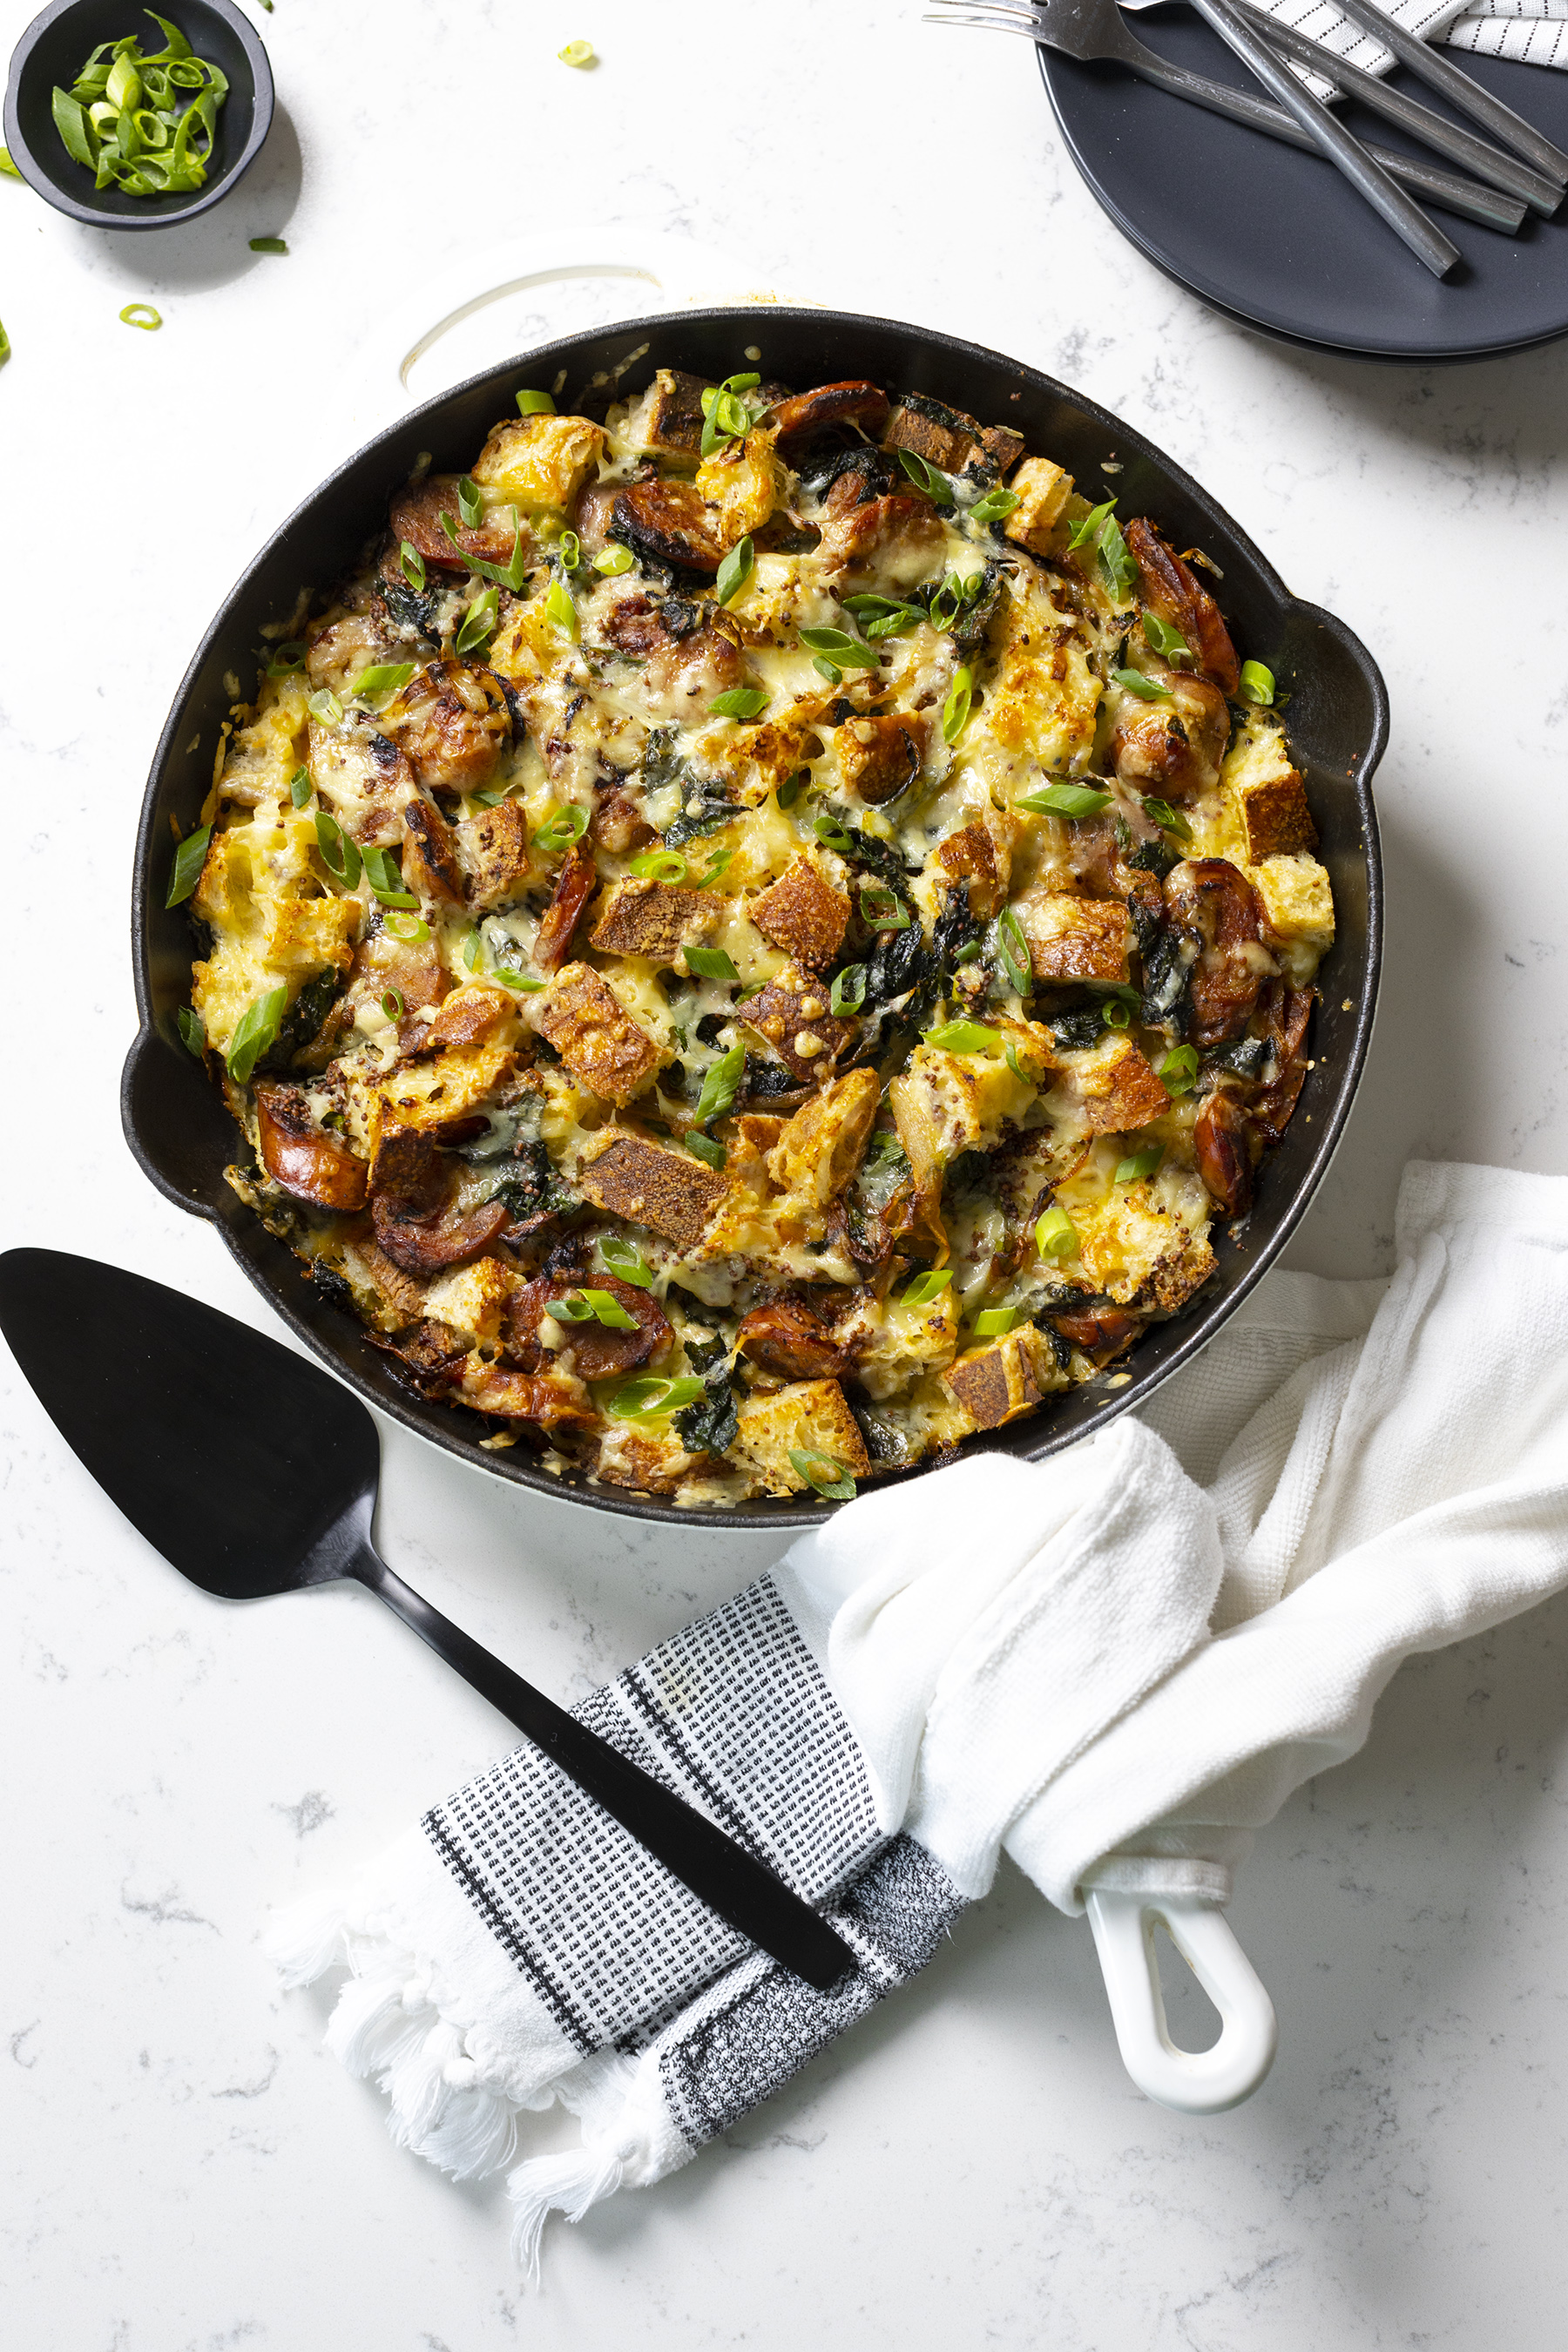 A strata that can be devoured any time of day, filled with cheddar cheese, kale and chicken apple sausage.